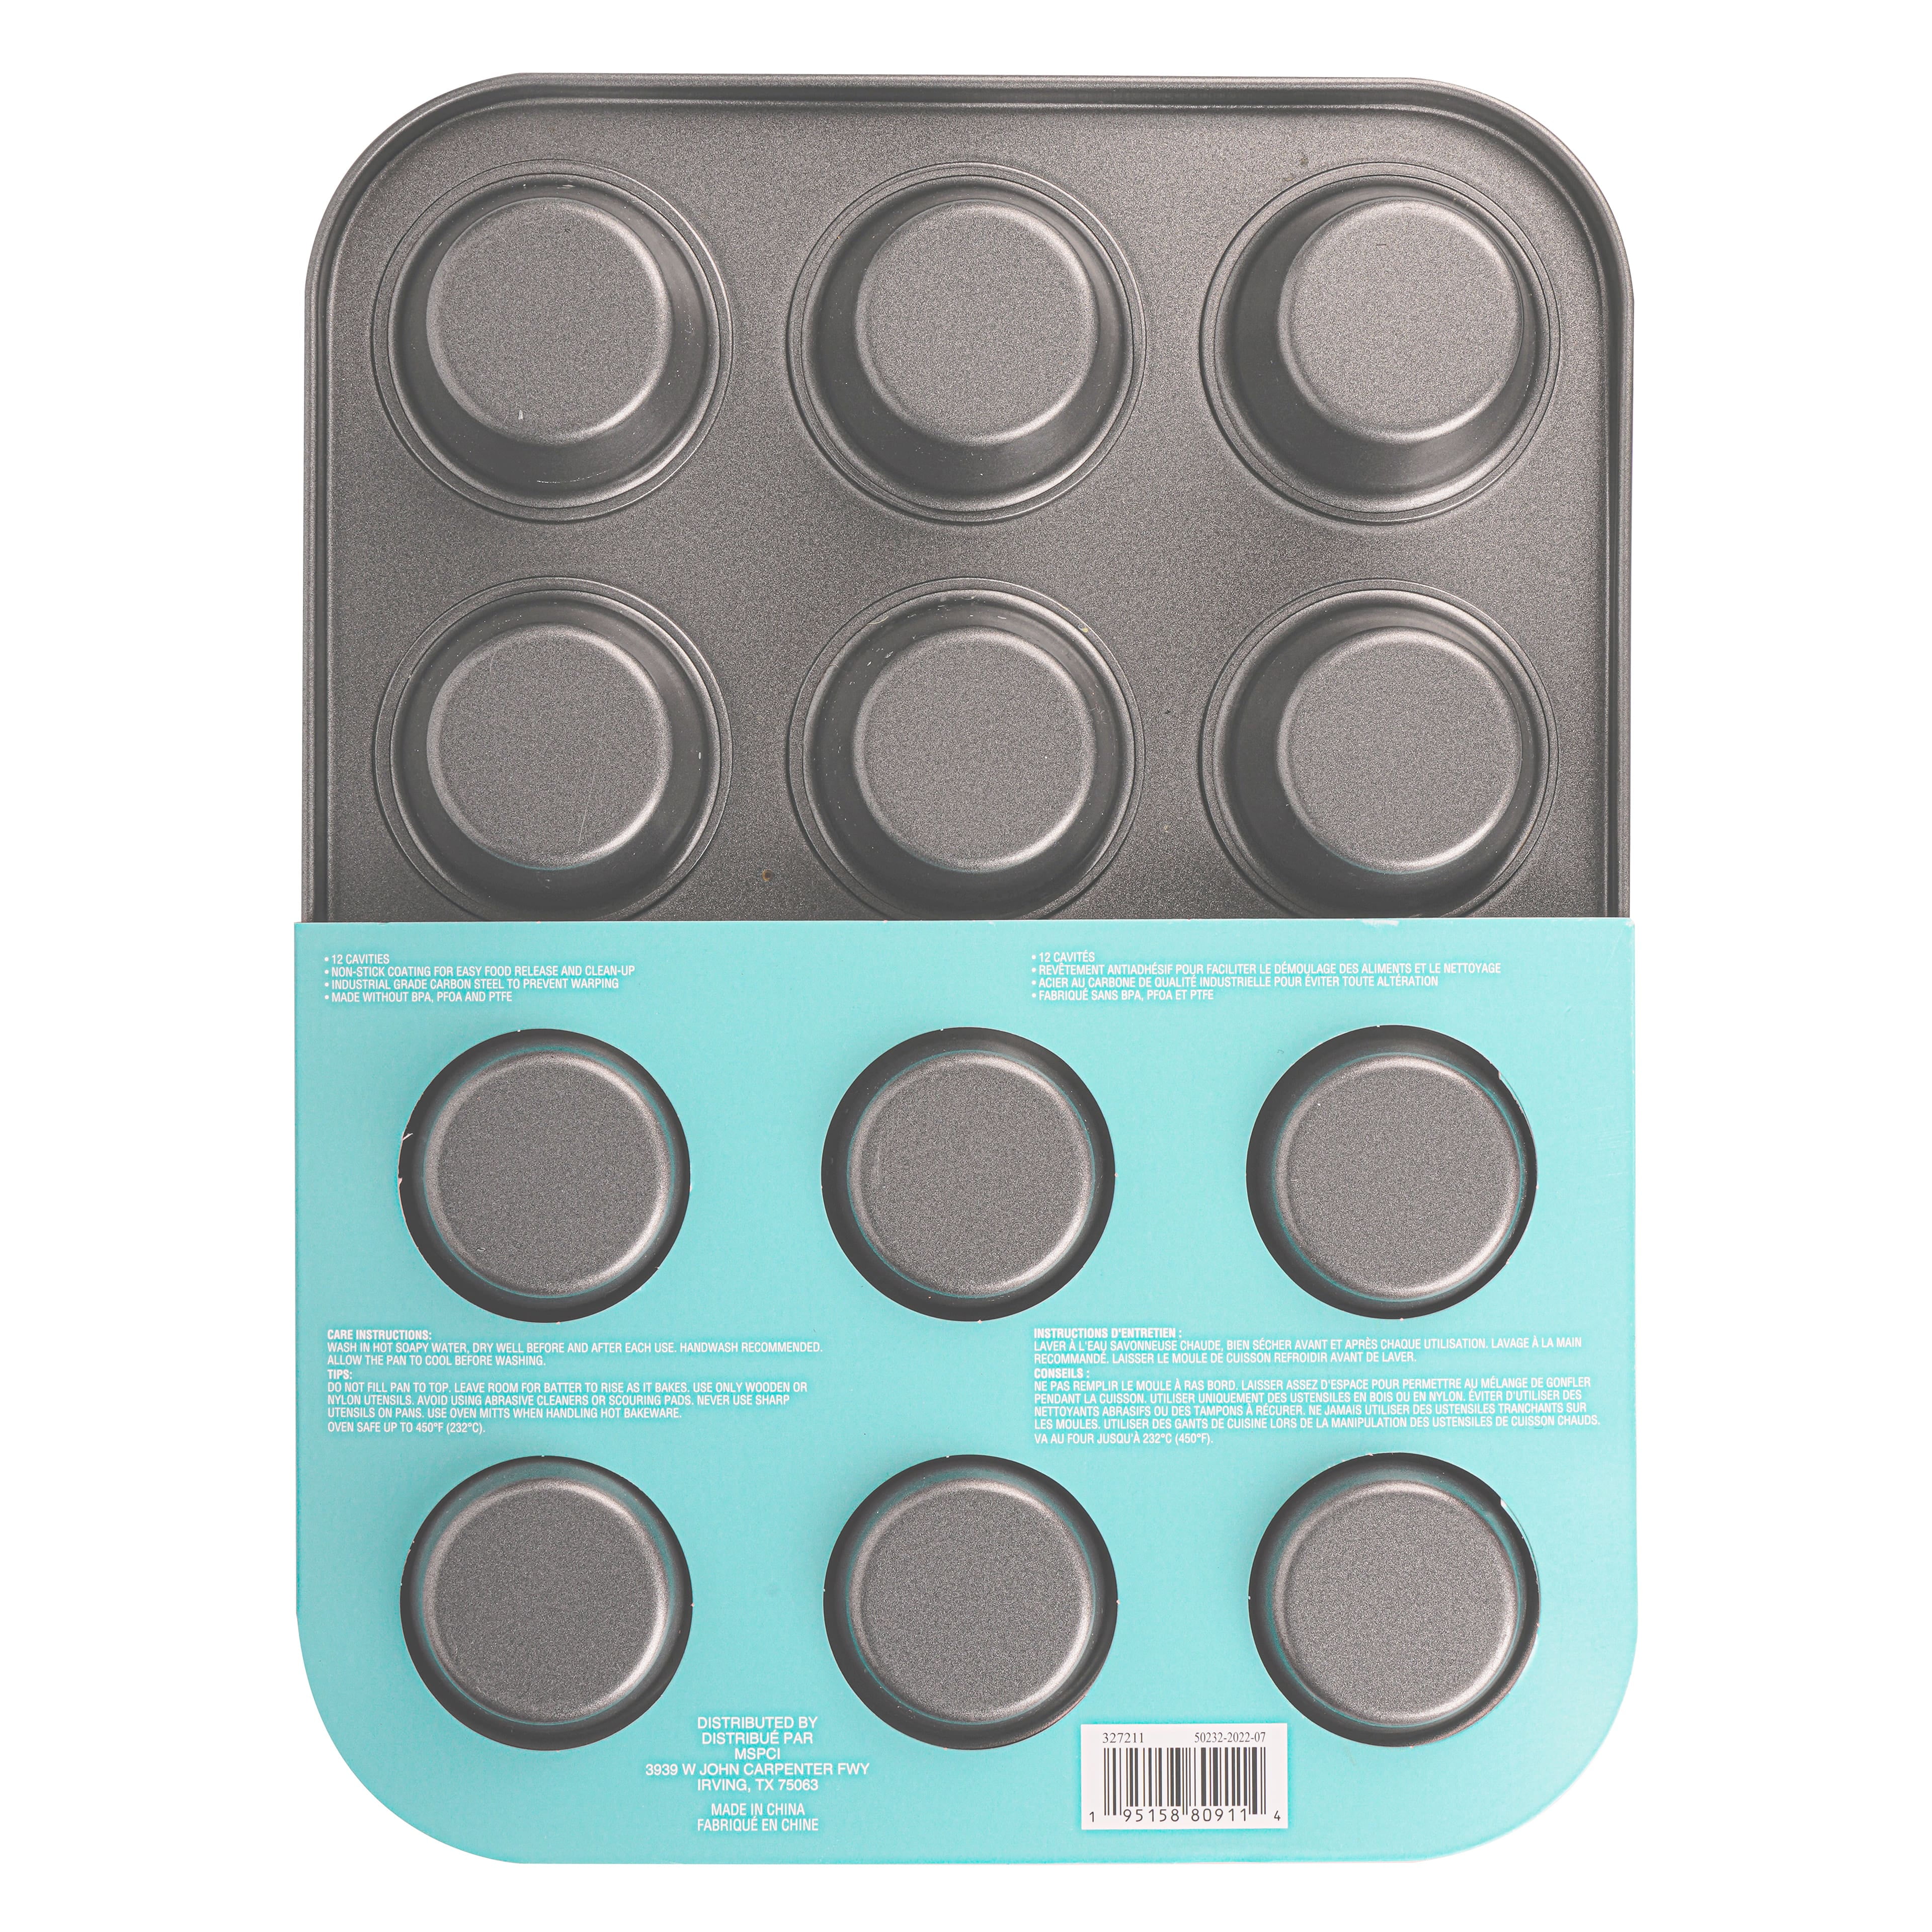 6 Pack: 12-Cup Muffin Pan by Celebrate It, Size: 10” x 0.82” x 7.67”, Silver